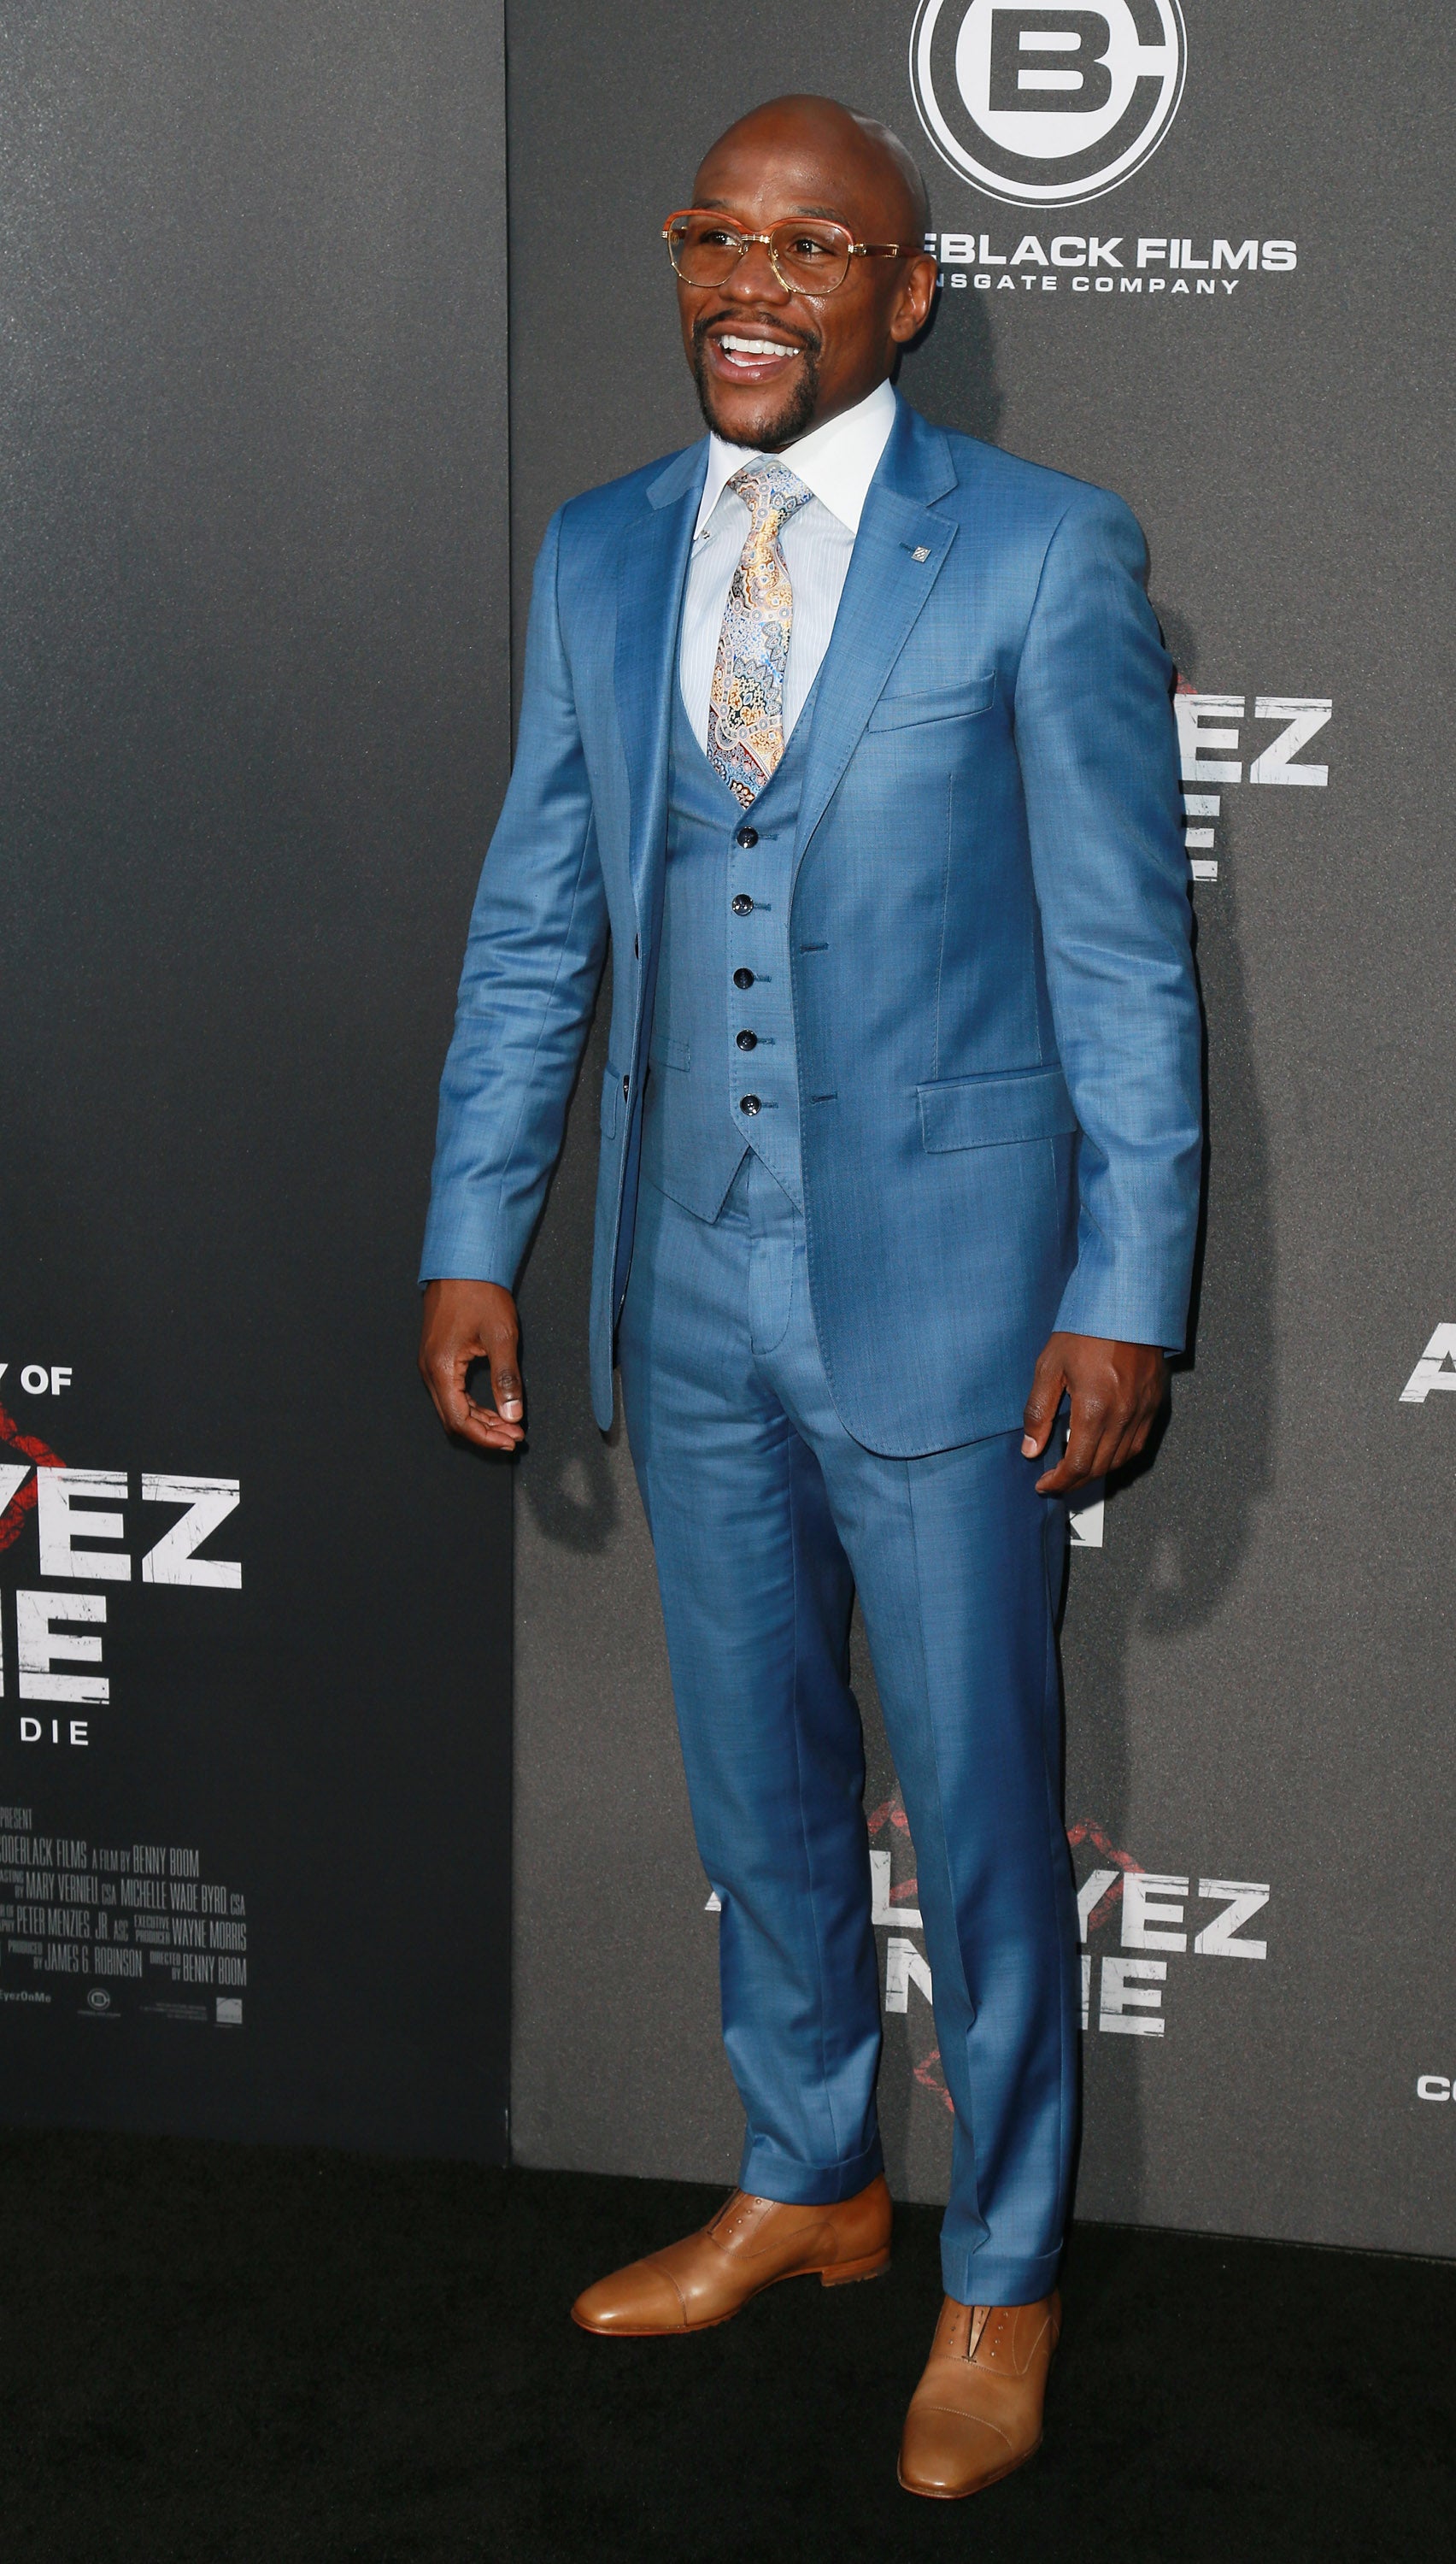 The 'All Eyez On Me' Premiere Was A Star-Studded Event
